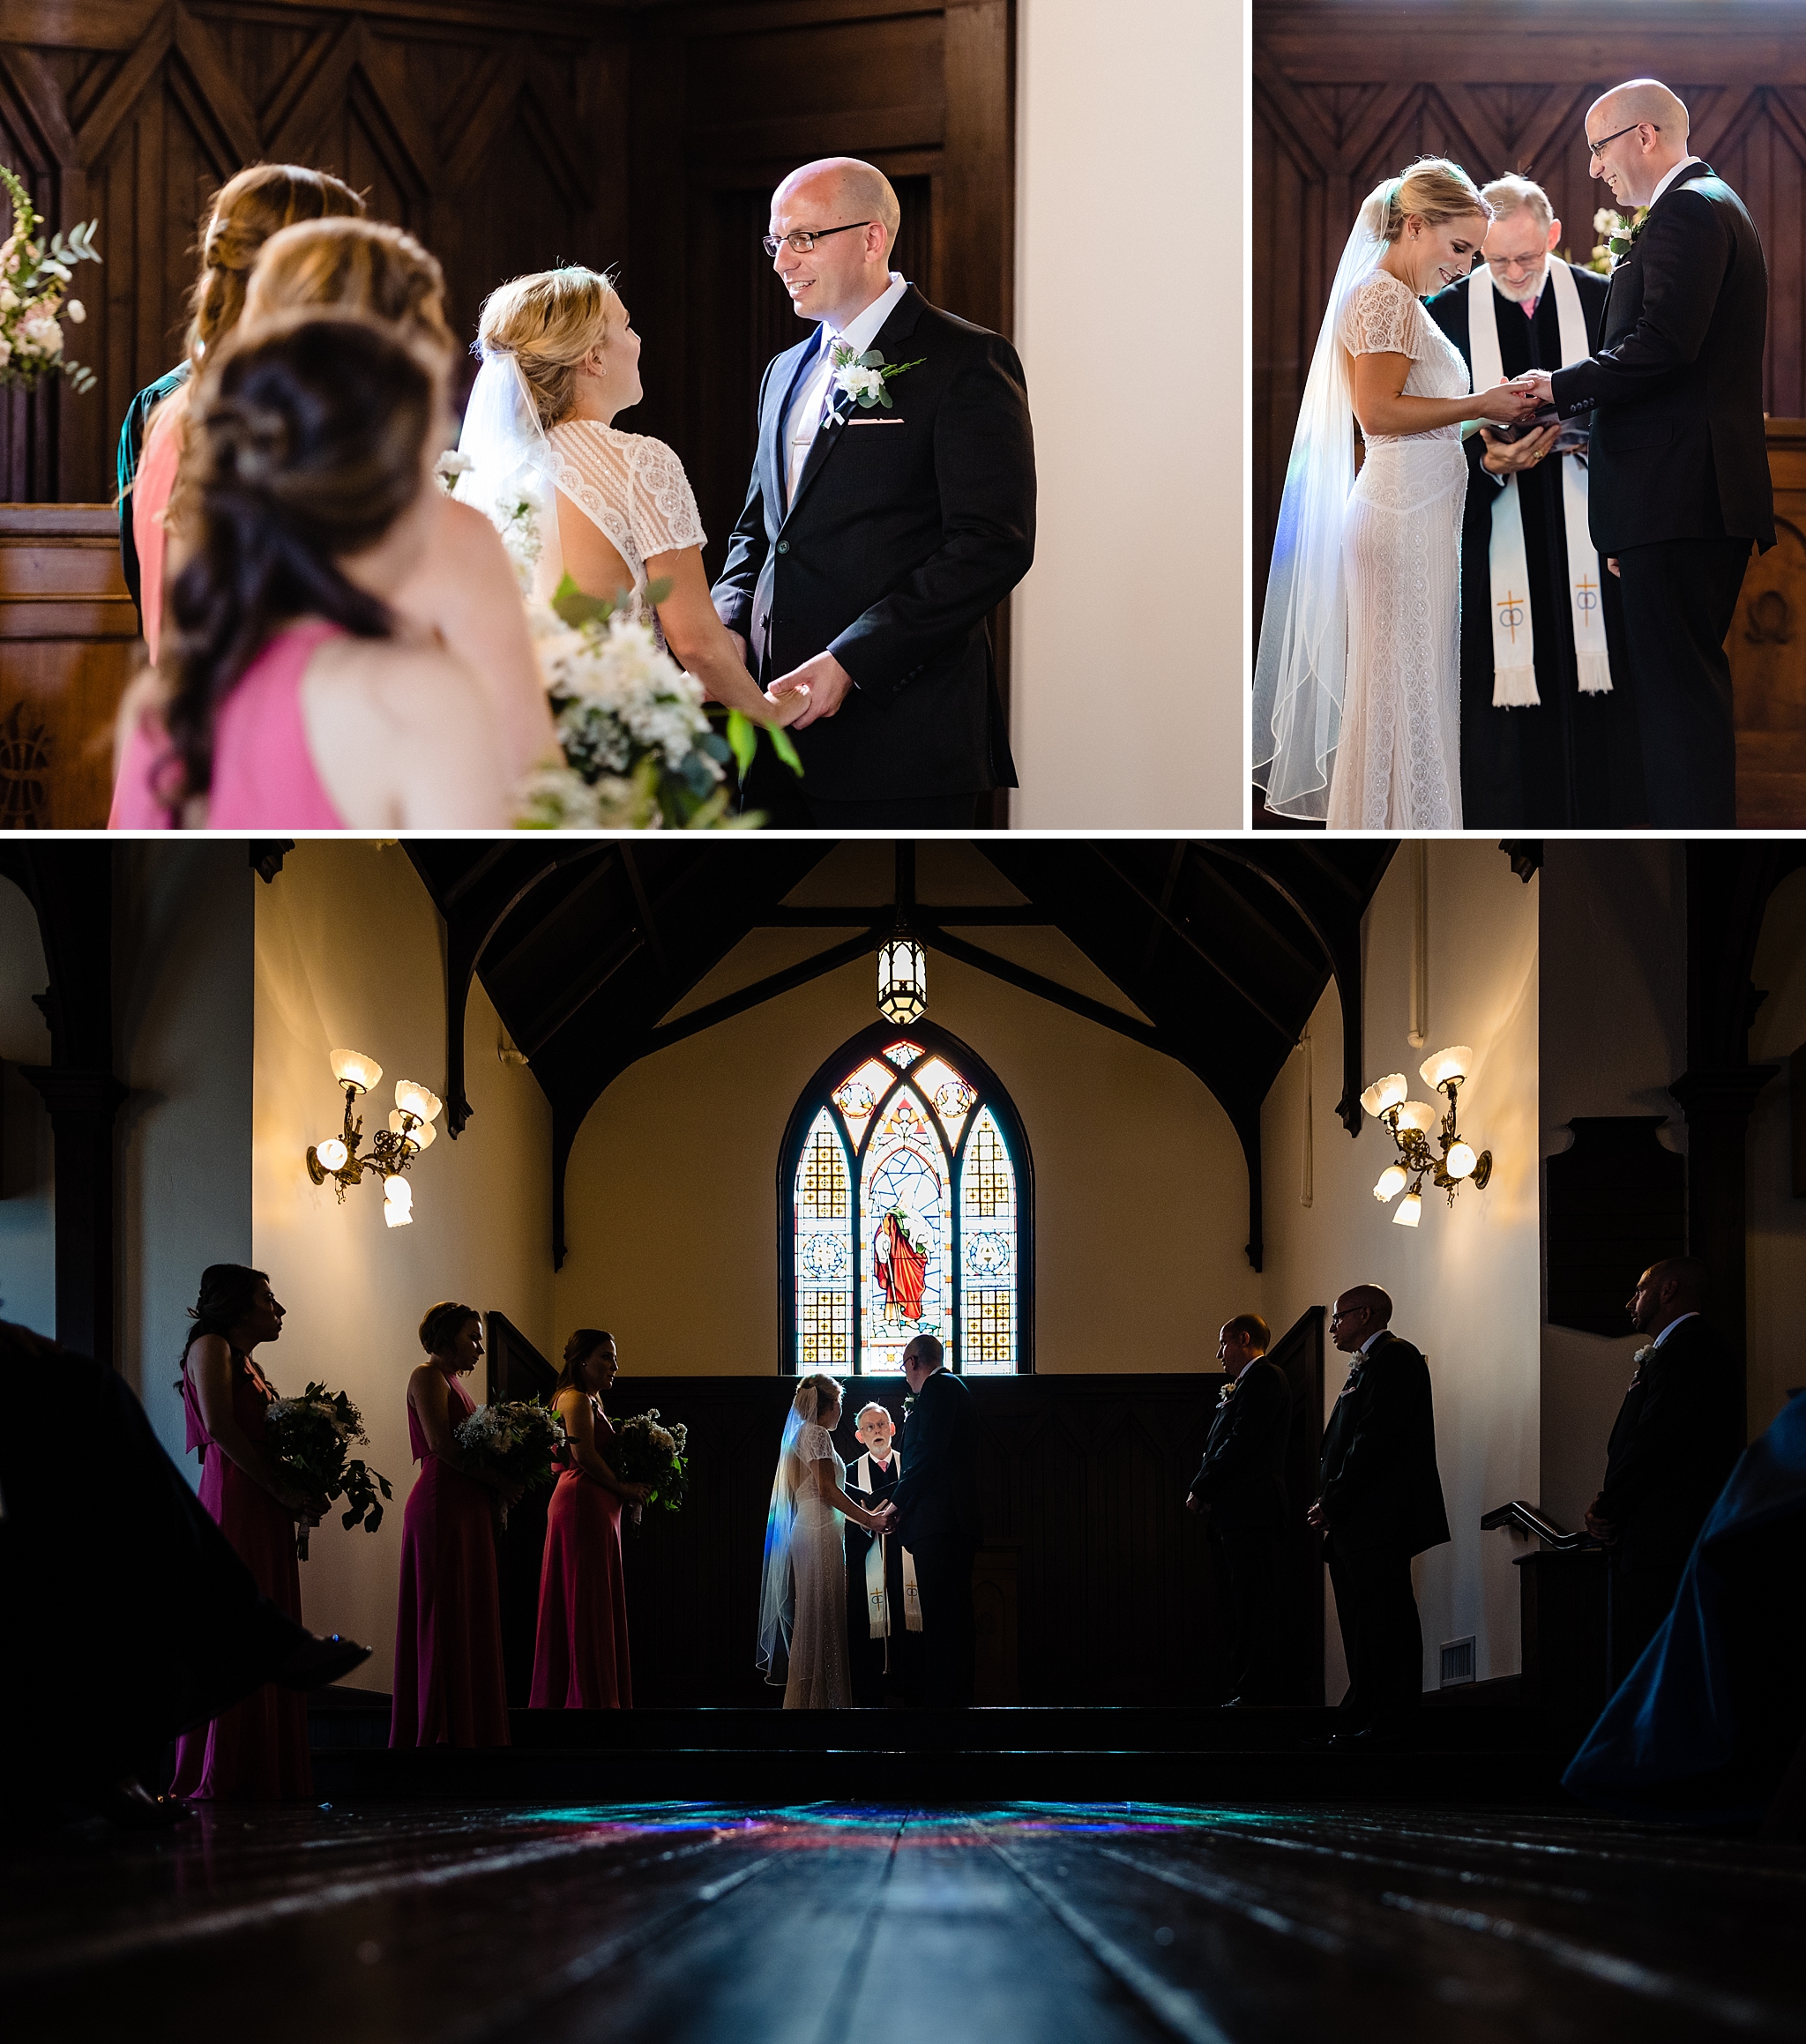 During an All Saints Chapel wedding ceremony, the sun streams through the stained glass window